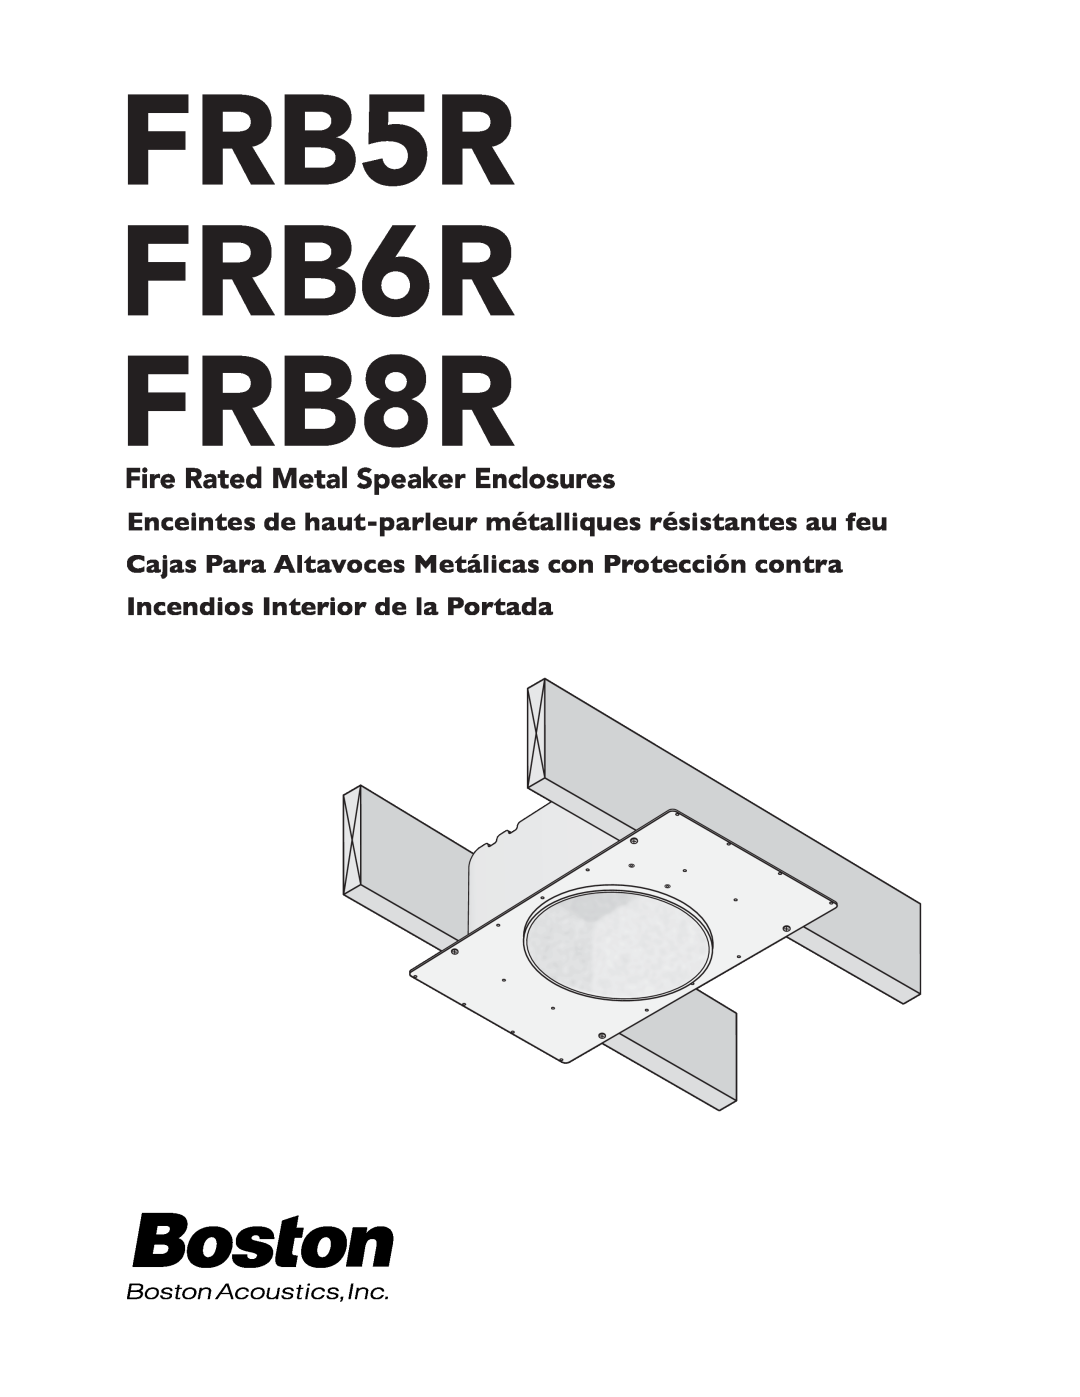 Boston Acoustics manual FRB5R FRB6R FRB8R, Fire Rated Metal Speaker Enclosures 